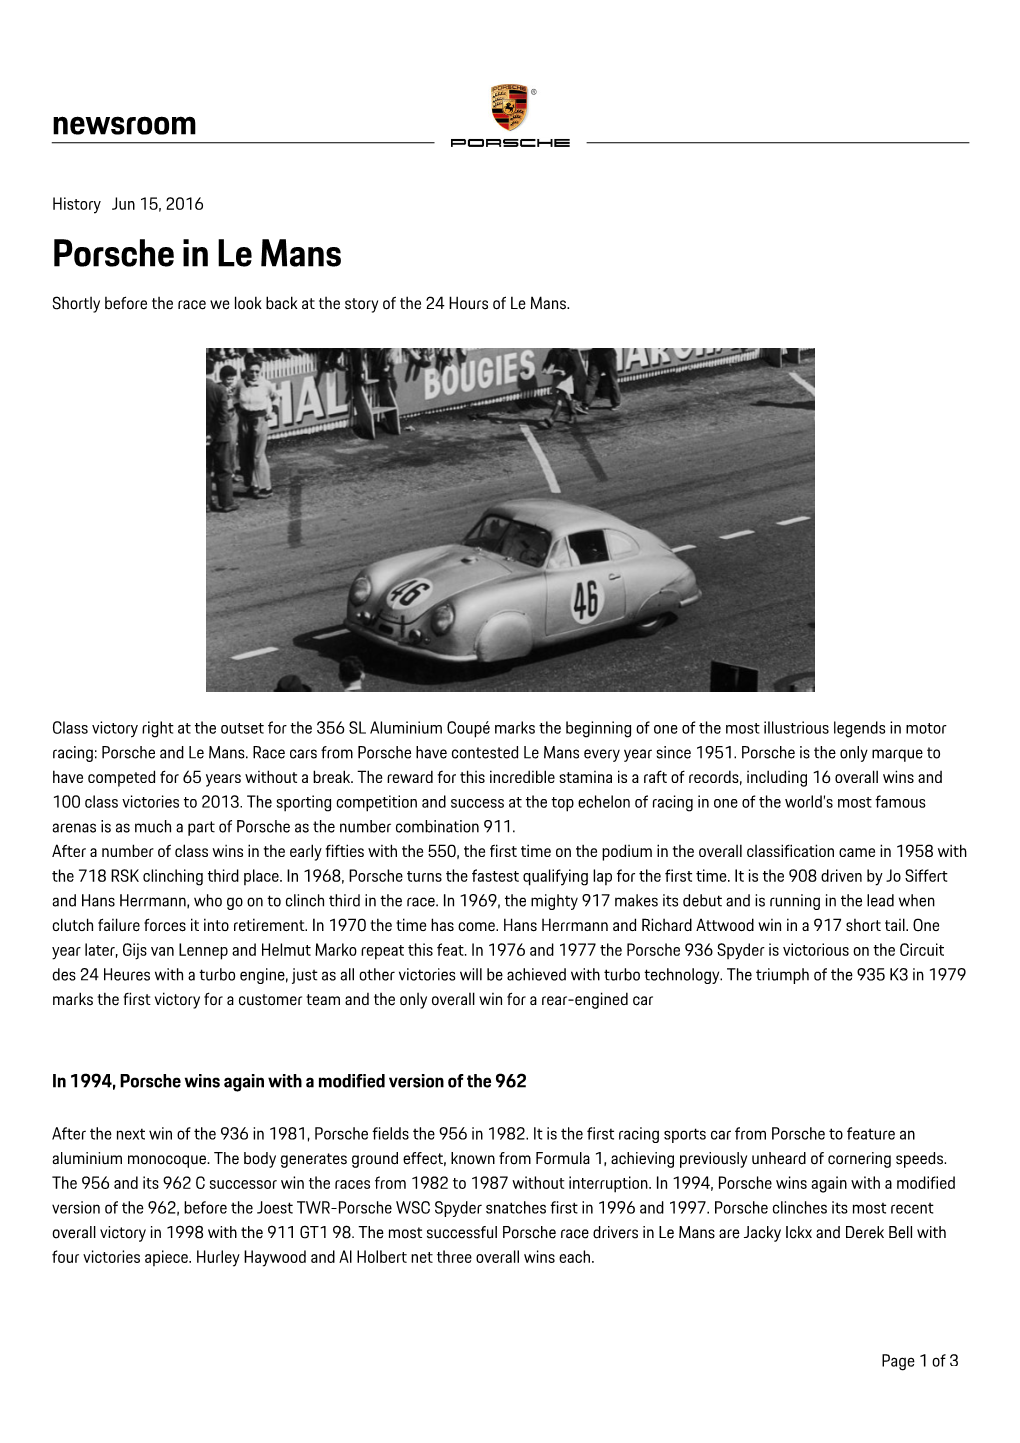 Porsche in Le Mans Shortly Before the Race We Look Back at the Story of the 24 Hours of Le Mans